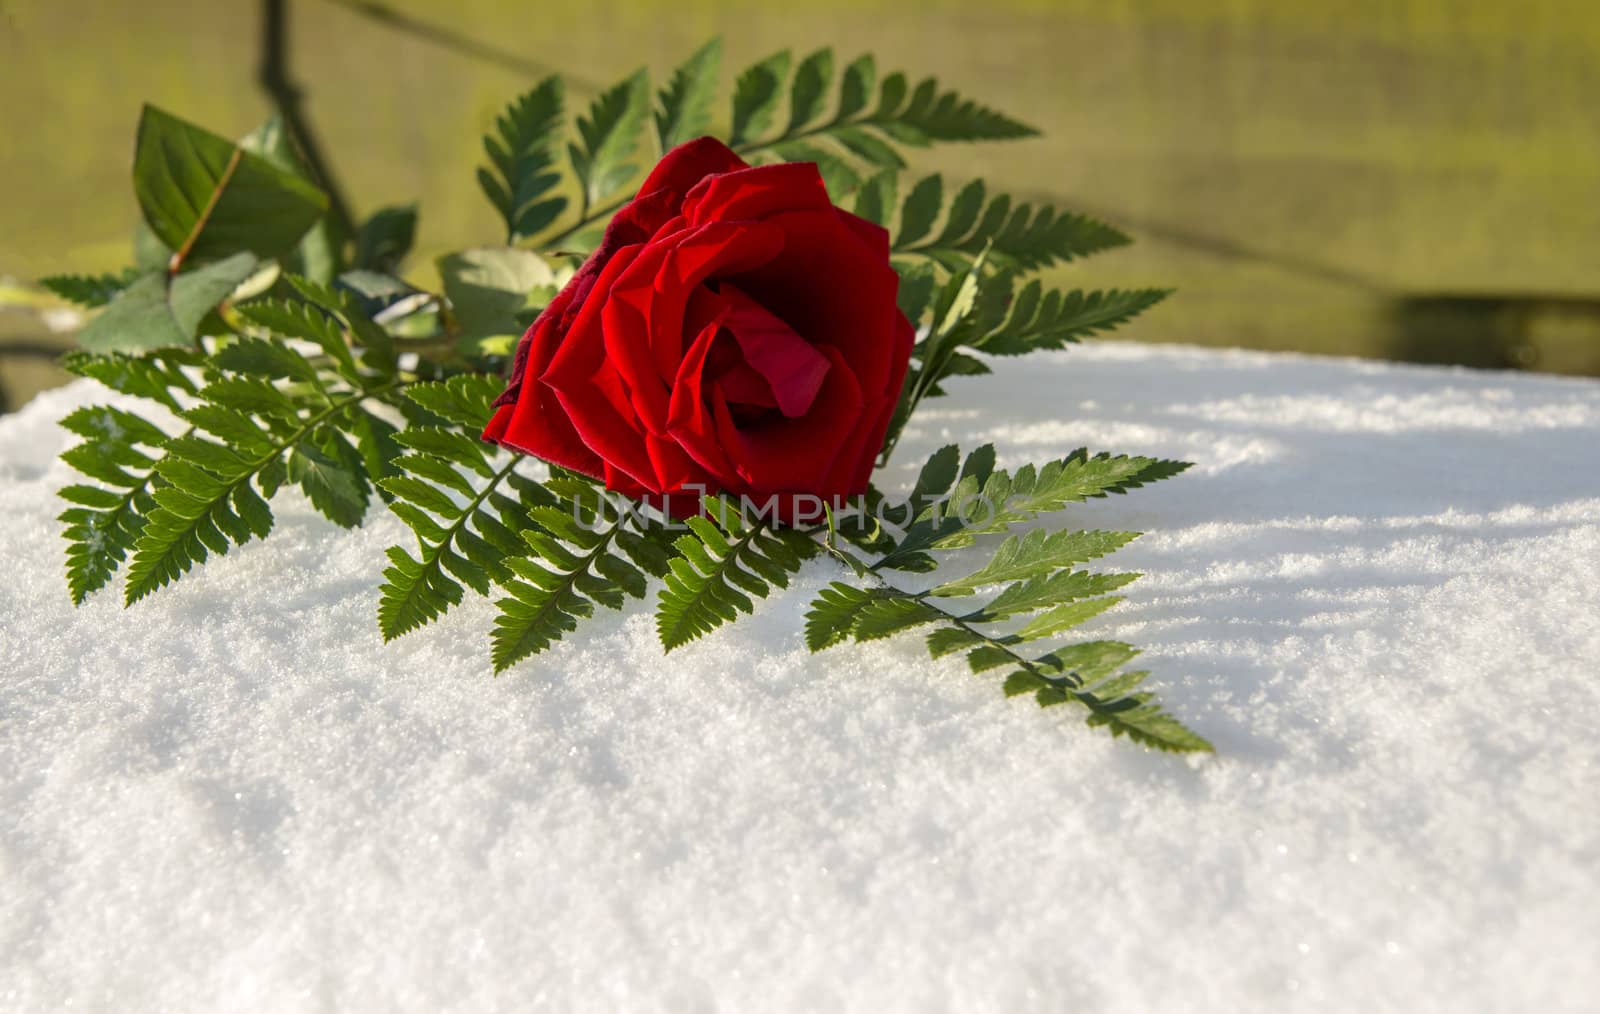 red rose in snow by compuinfoto